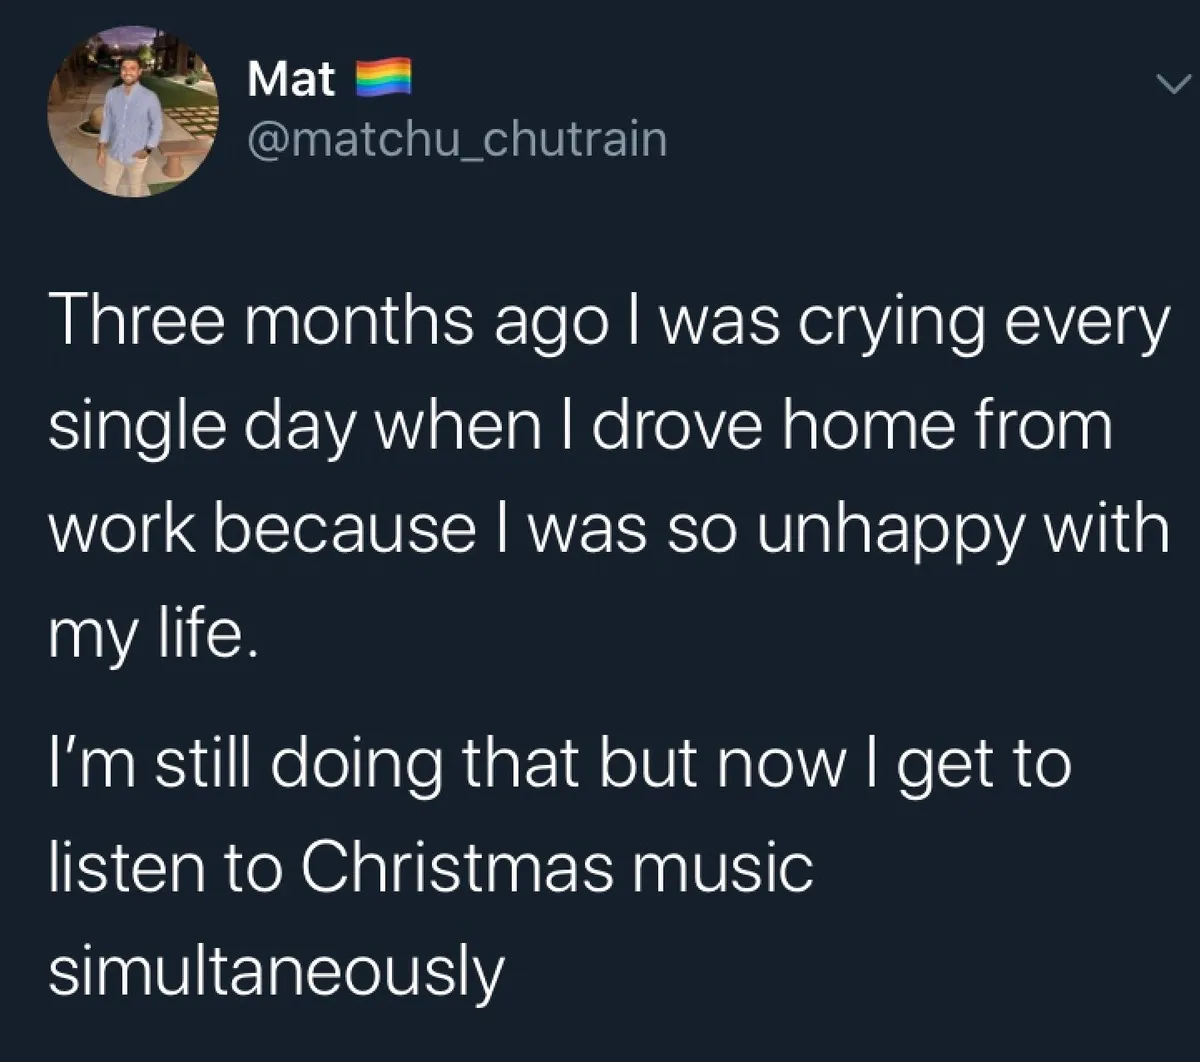 three months ago I was crying ever single day when I drove home from work because I was so unhappy with my life. I'm still doing that but now I get to listen to Christmas music simulataneously